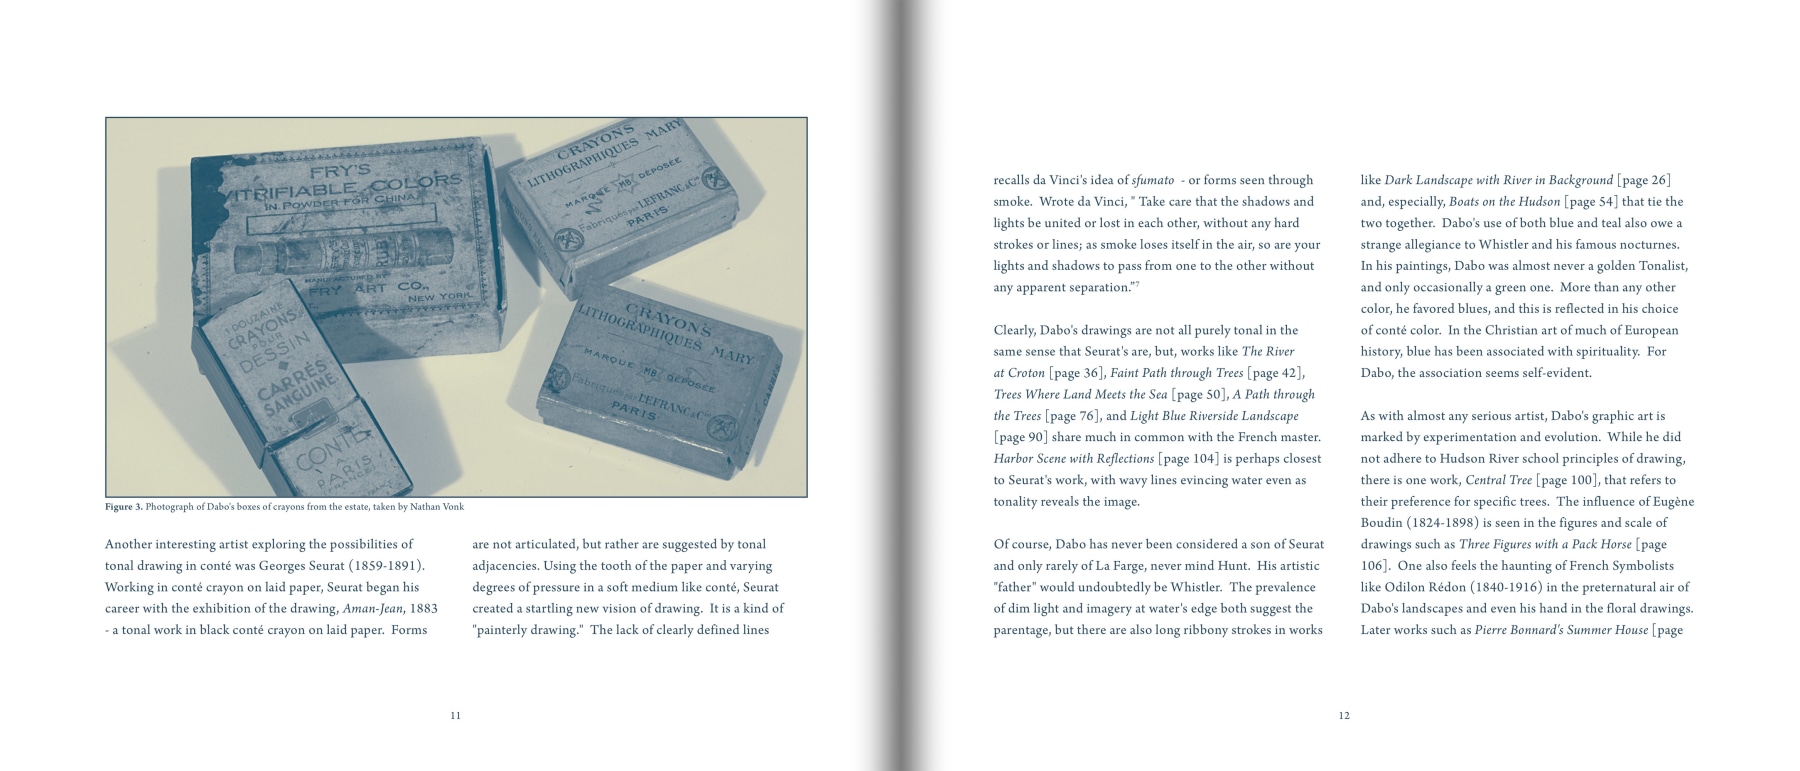 Pages 11 and 12 of The Drawings of LEON DABO, featuring two pages of the essay and a blue and white photograph of the artist's drawing materials